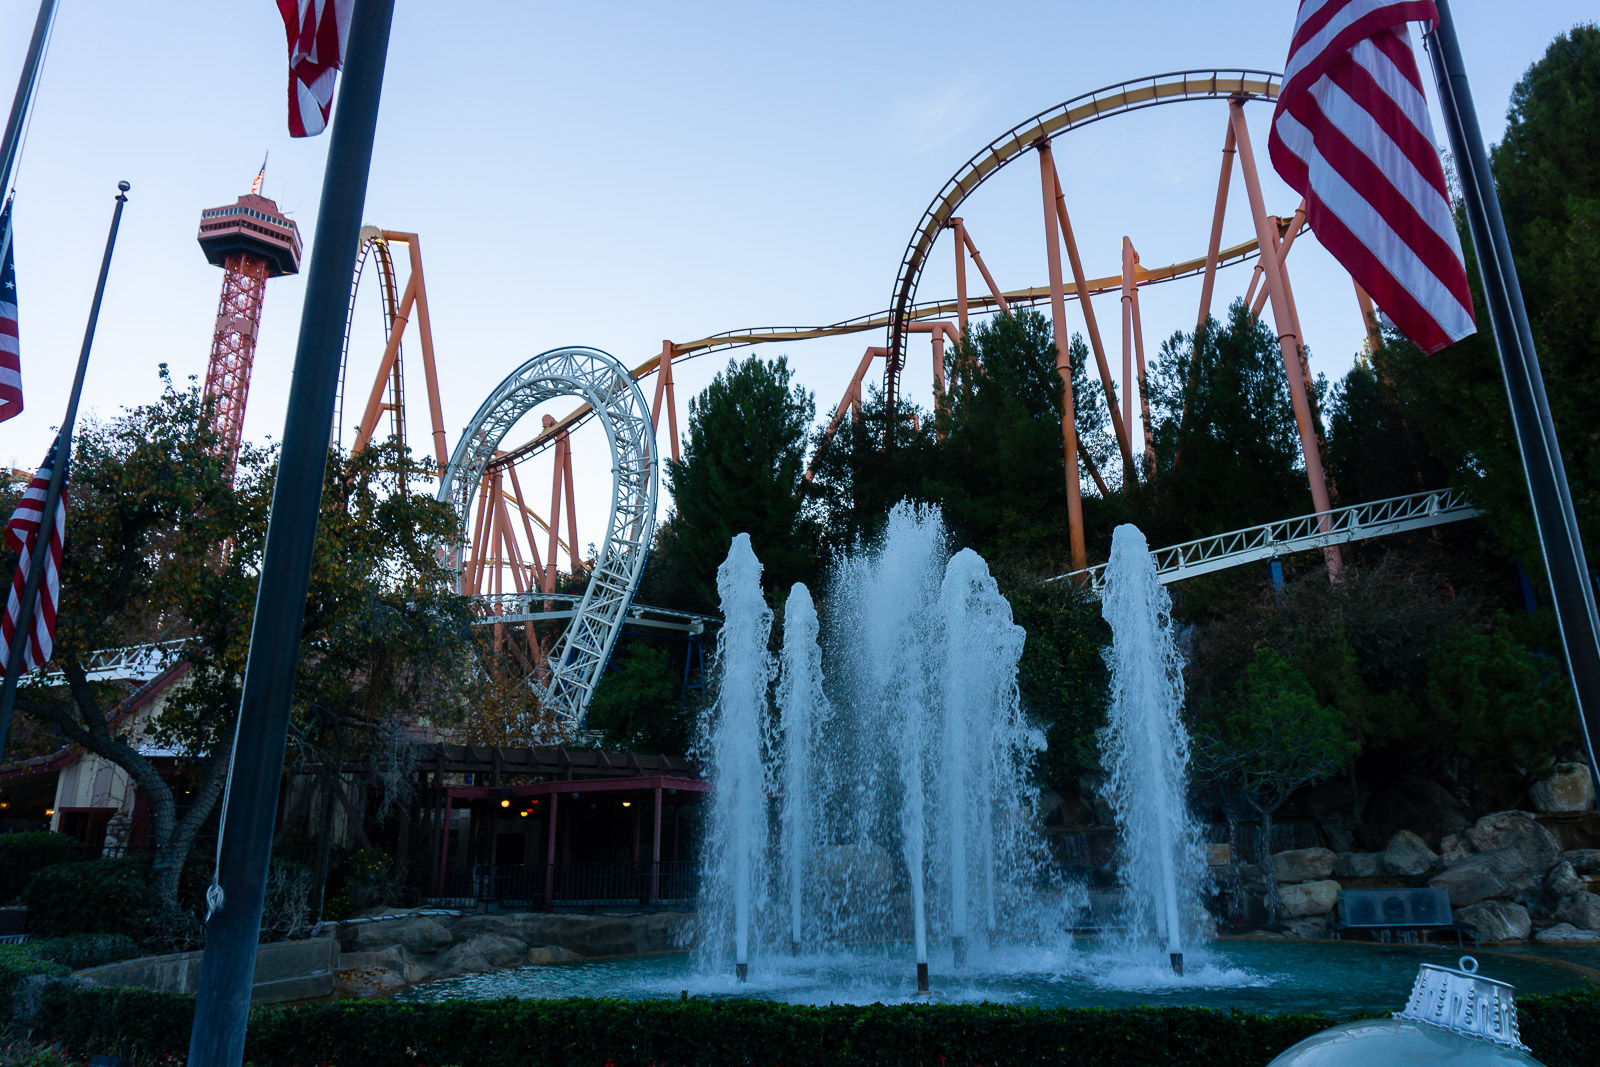 A classic view of Six Flags Magic Mountain